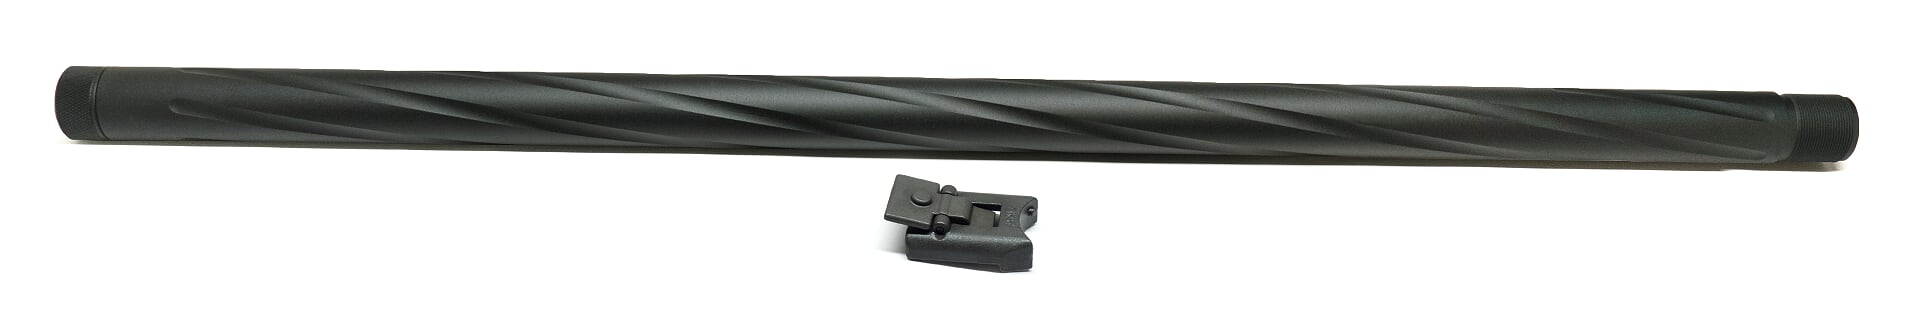 TWISTED OUTER BARREL - LONG - TYPE 96